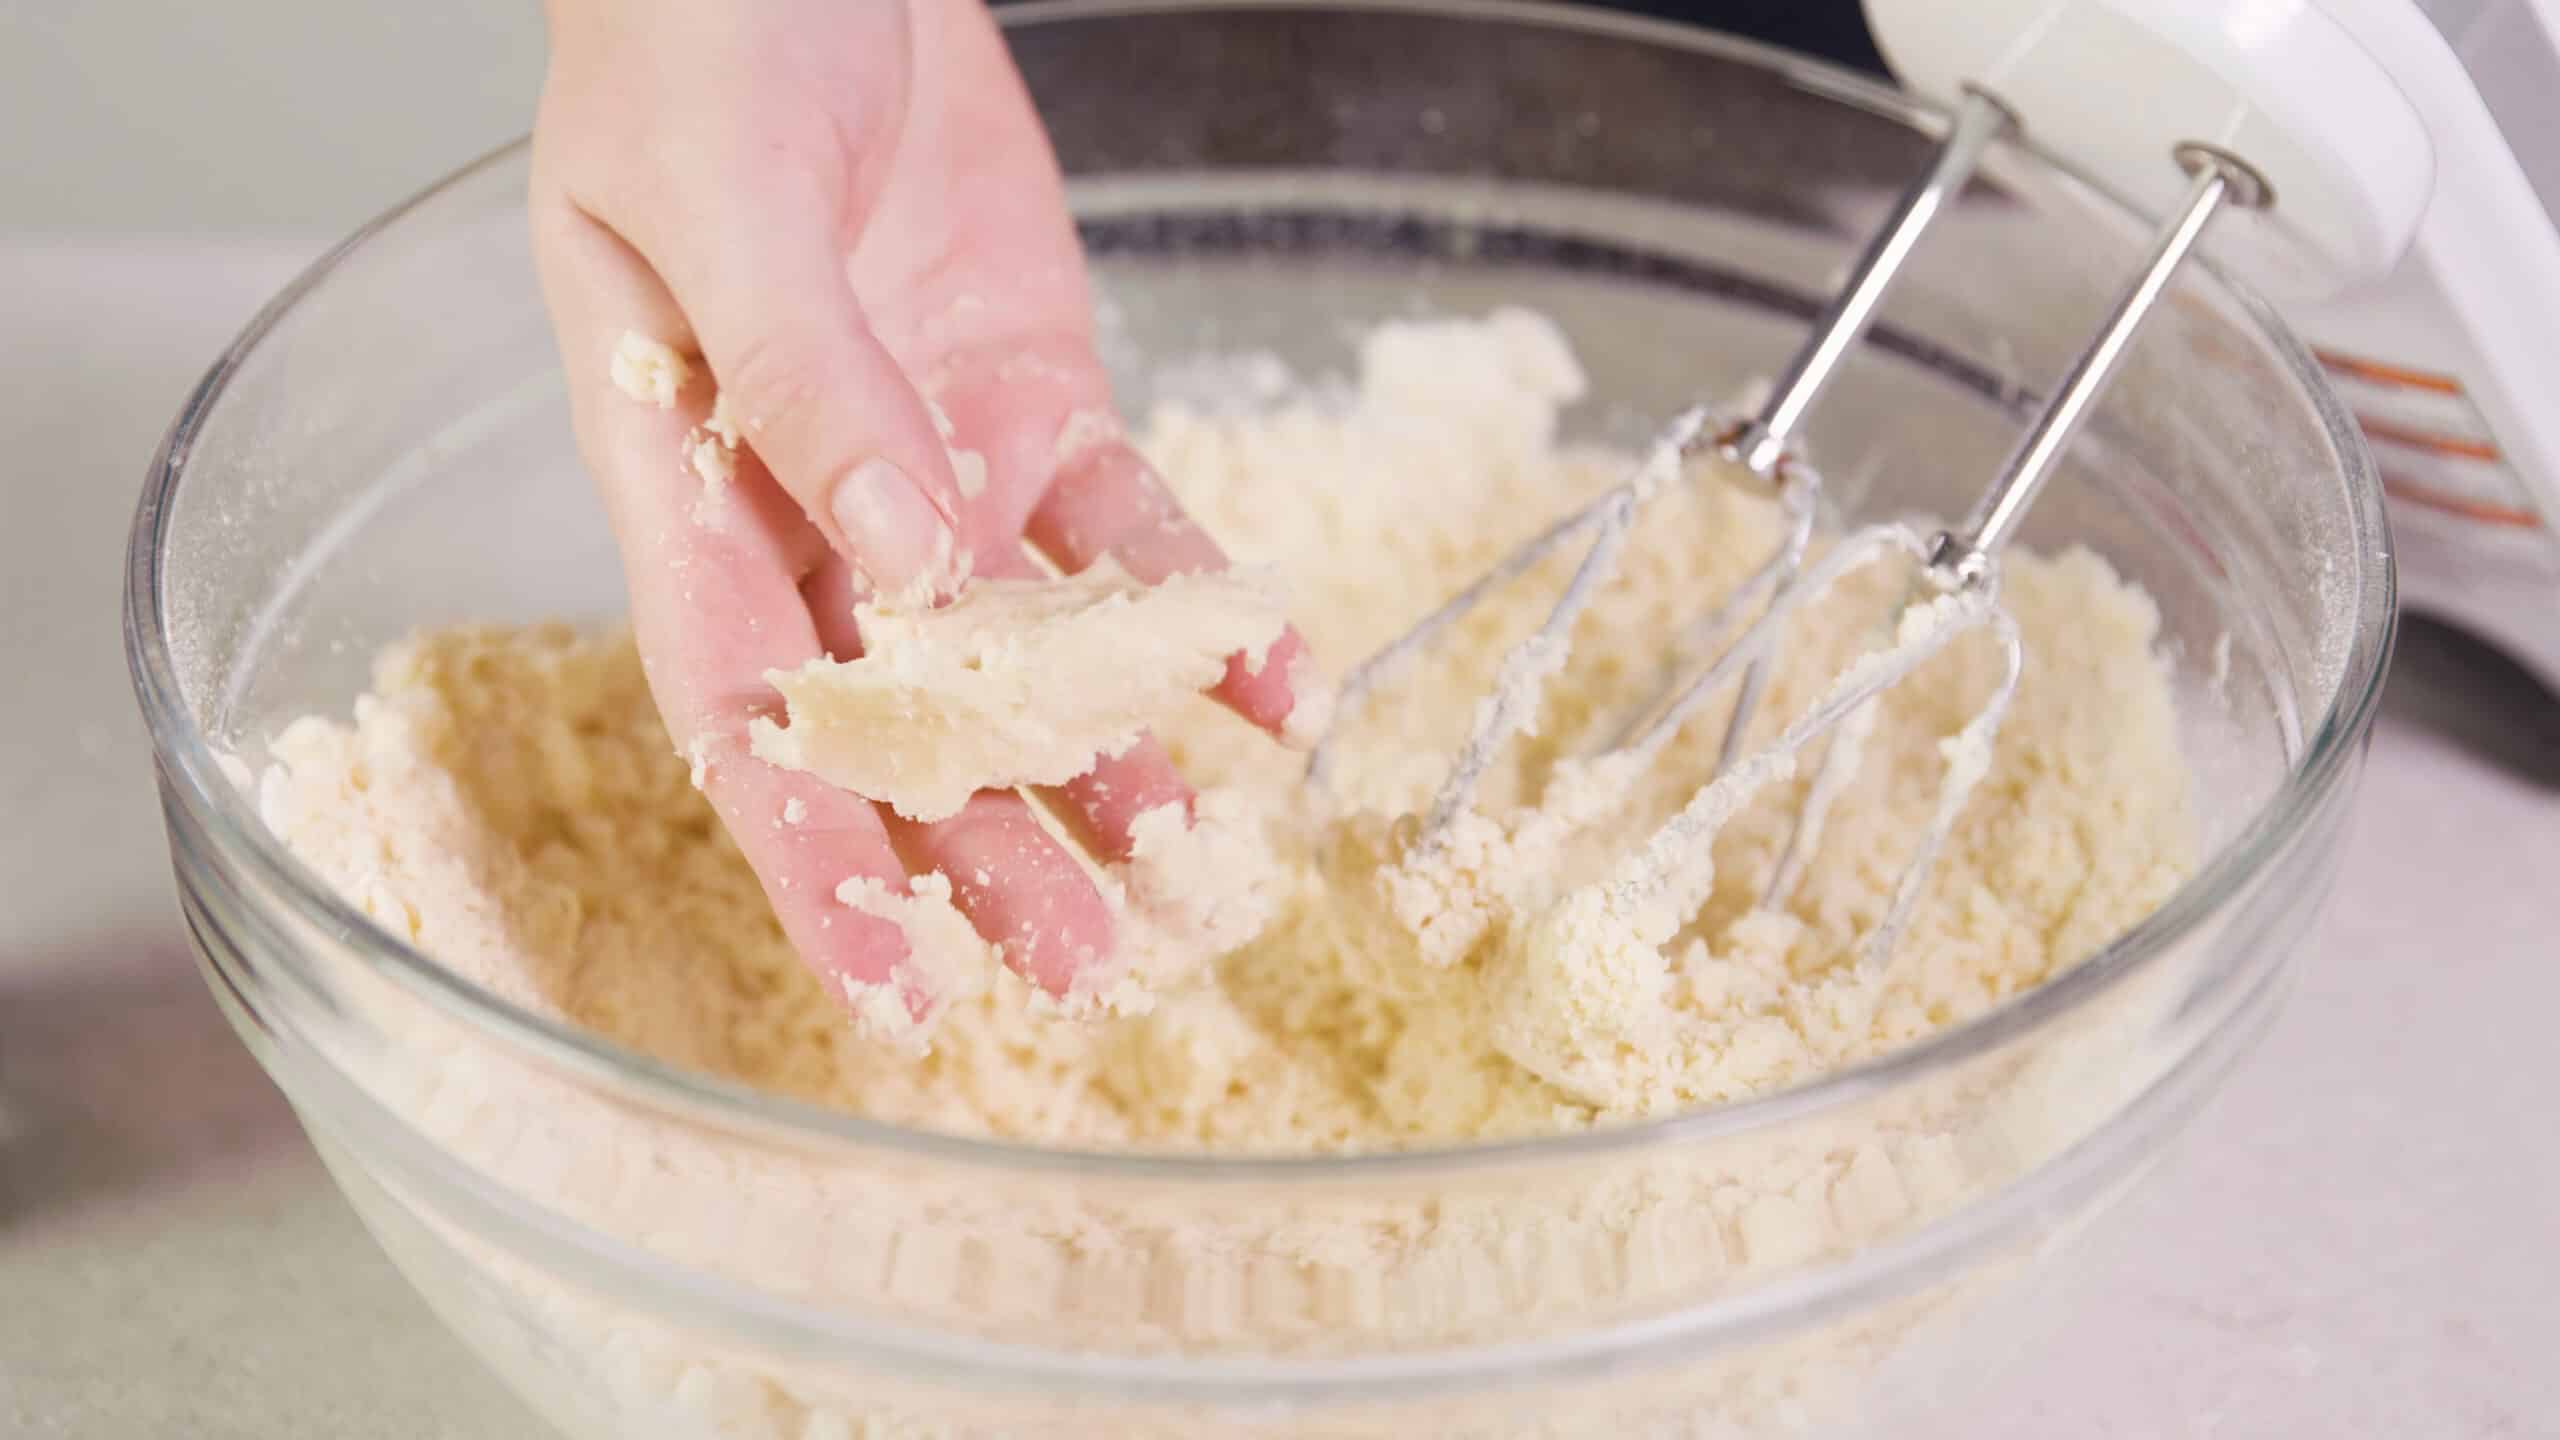 Close-up view of a large clear glass mixing bowl filled with shortbread cookies batter and a hand holding a portion of the batter that has been squeezed to show the texture once it has been pressed.